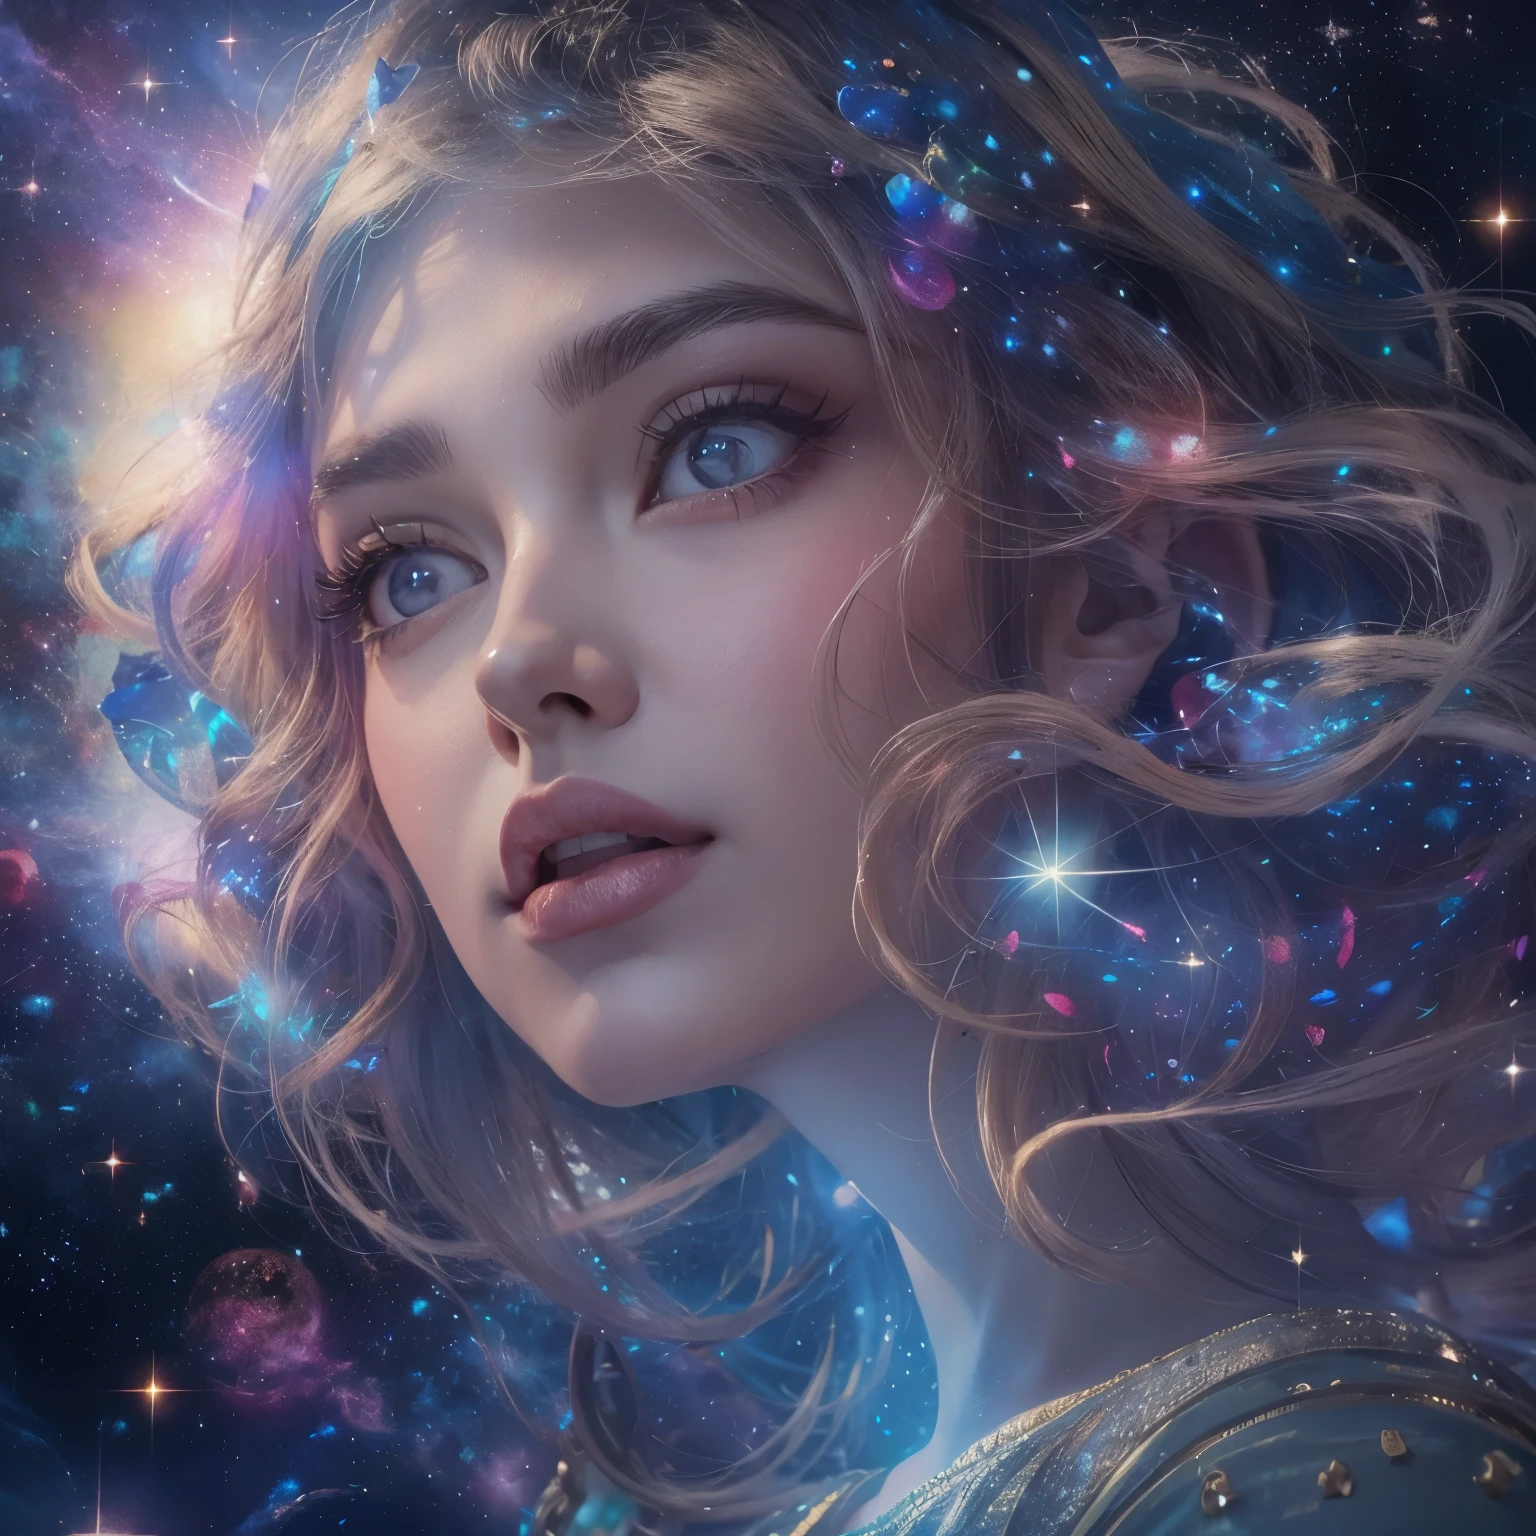 (best quality,4k,highres),beautiful girl with mesmerizing eyes,gorgeous galaxy viewing,sparkling stars,soft cosmic colors,ethereal atmosphere,peaceful serenity,celestial wonders,wonderful universe,stellar beauty,romantic stardust,celestial portrait,cosmic perspective,astounding cosmic art,galactic elegance,transcendent charm,celestial goddess,cosmic enchantment,cosmic girl admiring the magnificent galaxy,cosmic dreamworld,galactic reverie,cosmic masterpiece:1.2